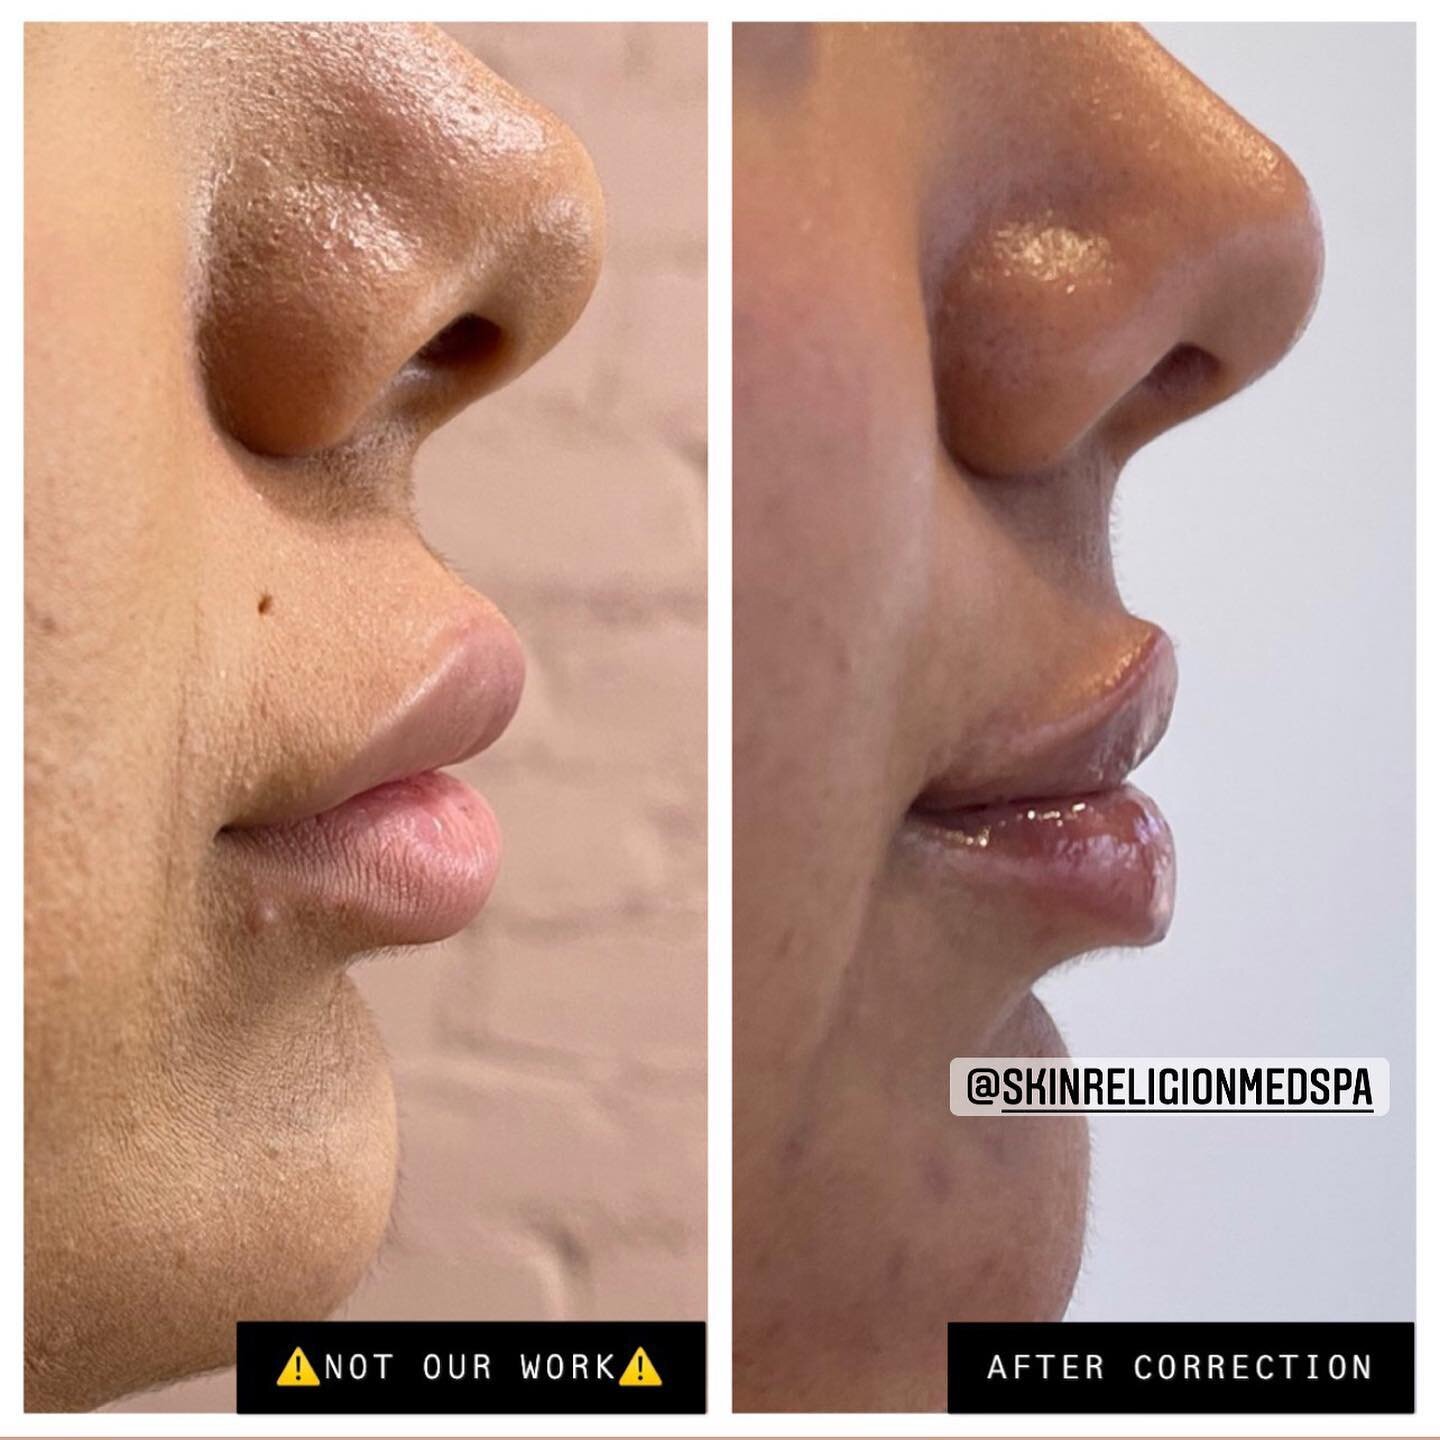 MAJOR CORRECTION RESULTS:

This lovely client came in wanting the #russianliptechnique but unfortunately needed 3 sessions of dissolver for the &ldquo;shelf&rdquo; she had above her lip line. We dissolved her and redid her lips!

The #russiantechniqu